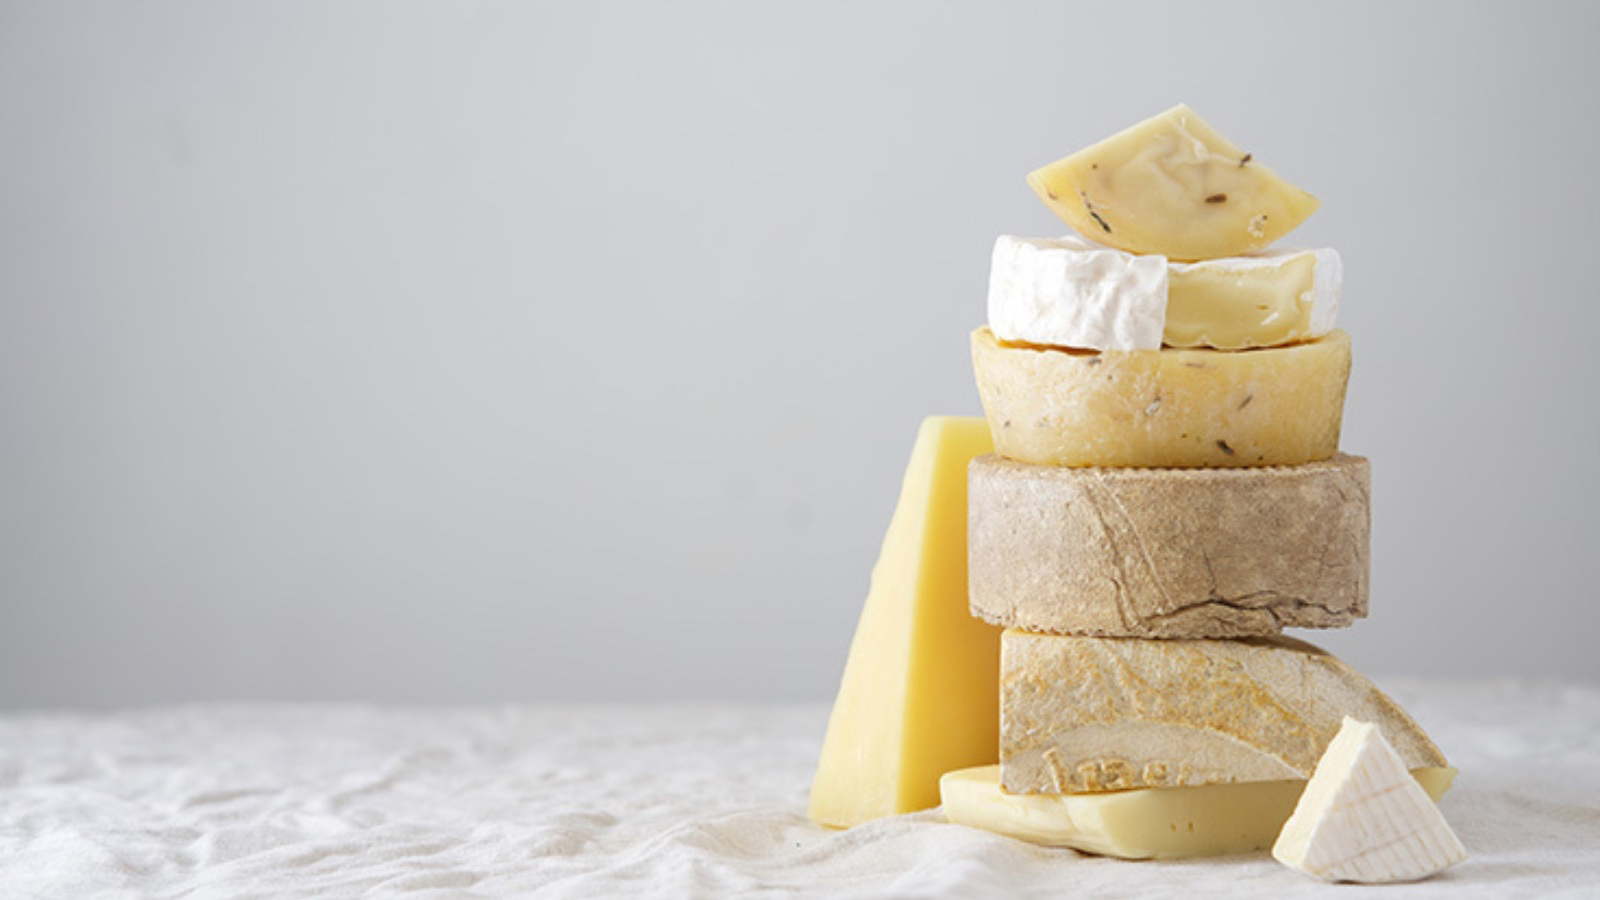 A stack of various cheeses on a white table.